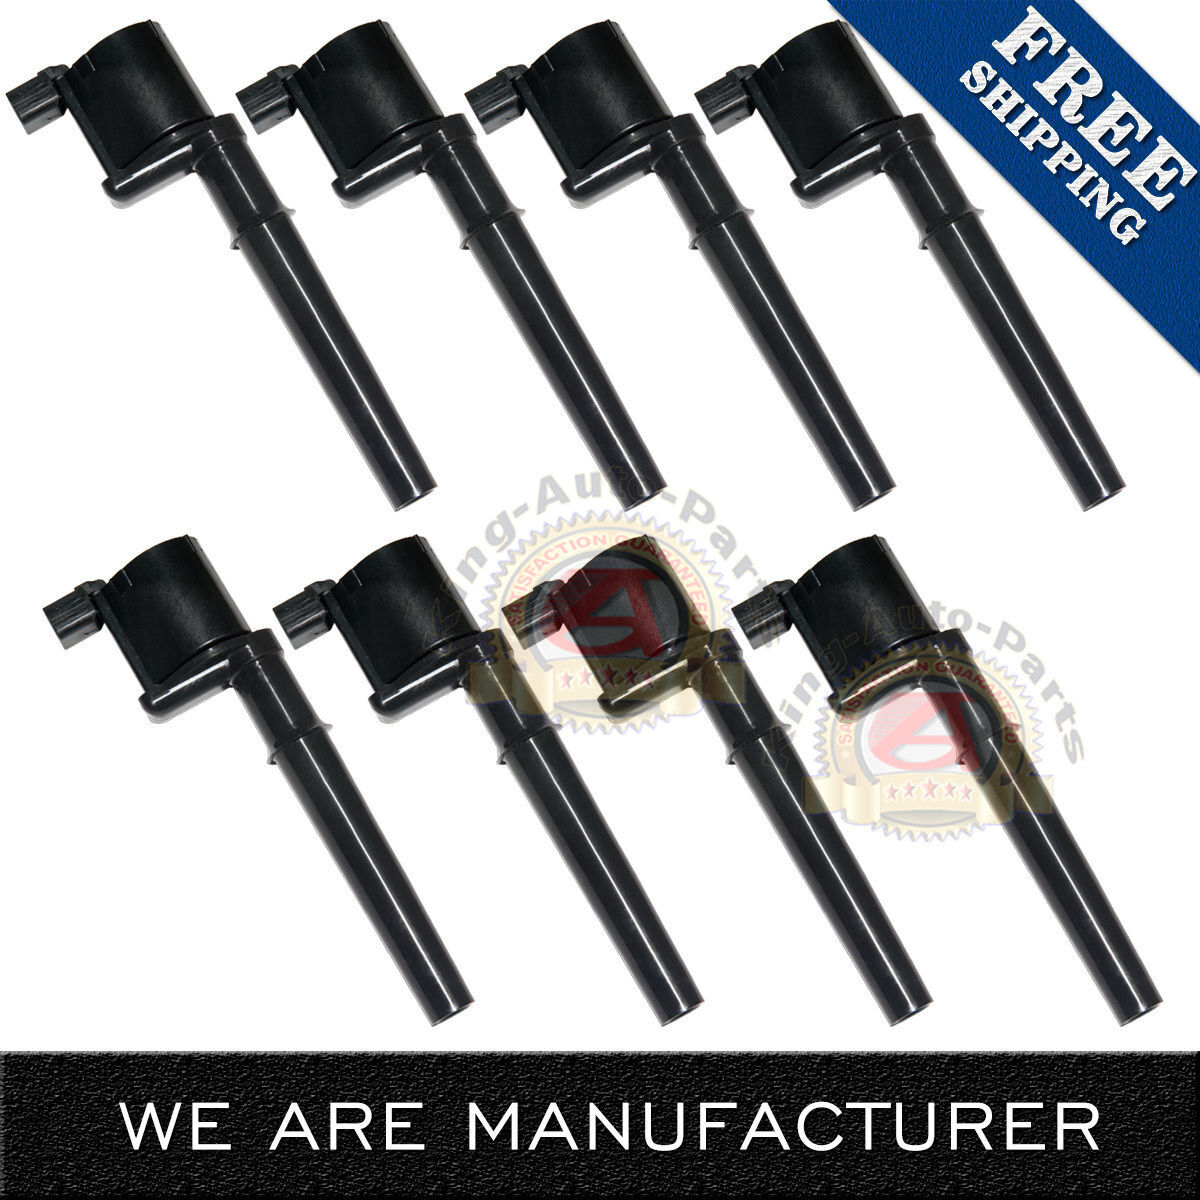 NEW 8 Pack Ignition Coils for Various Lincoln Ford GT Mustang DG512 C1141 UF191